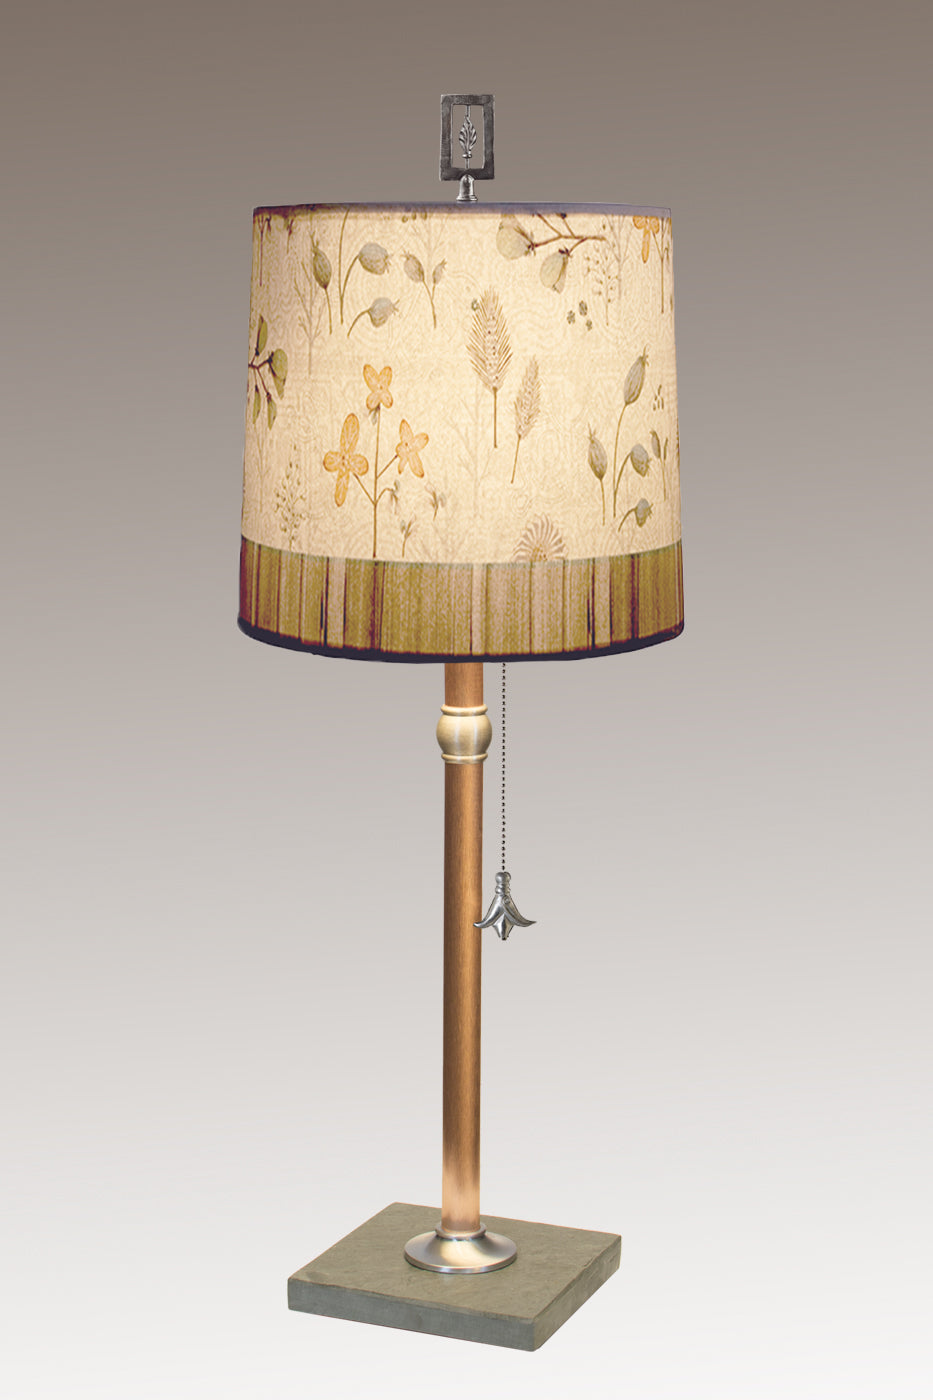 Janna Ugone & Co Table Lamps Copper Table Lamp with Medium Drum Shade in Flora & Maze